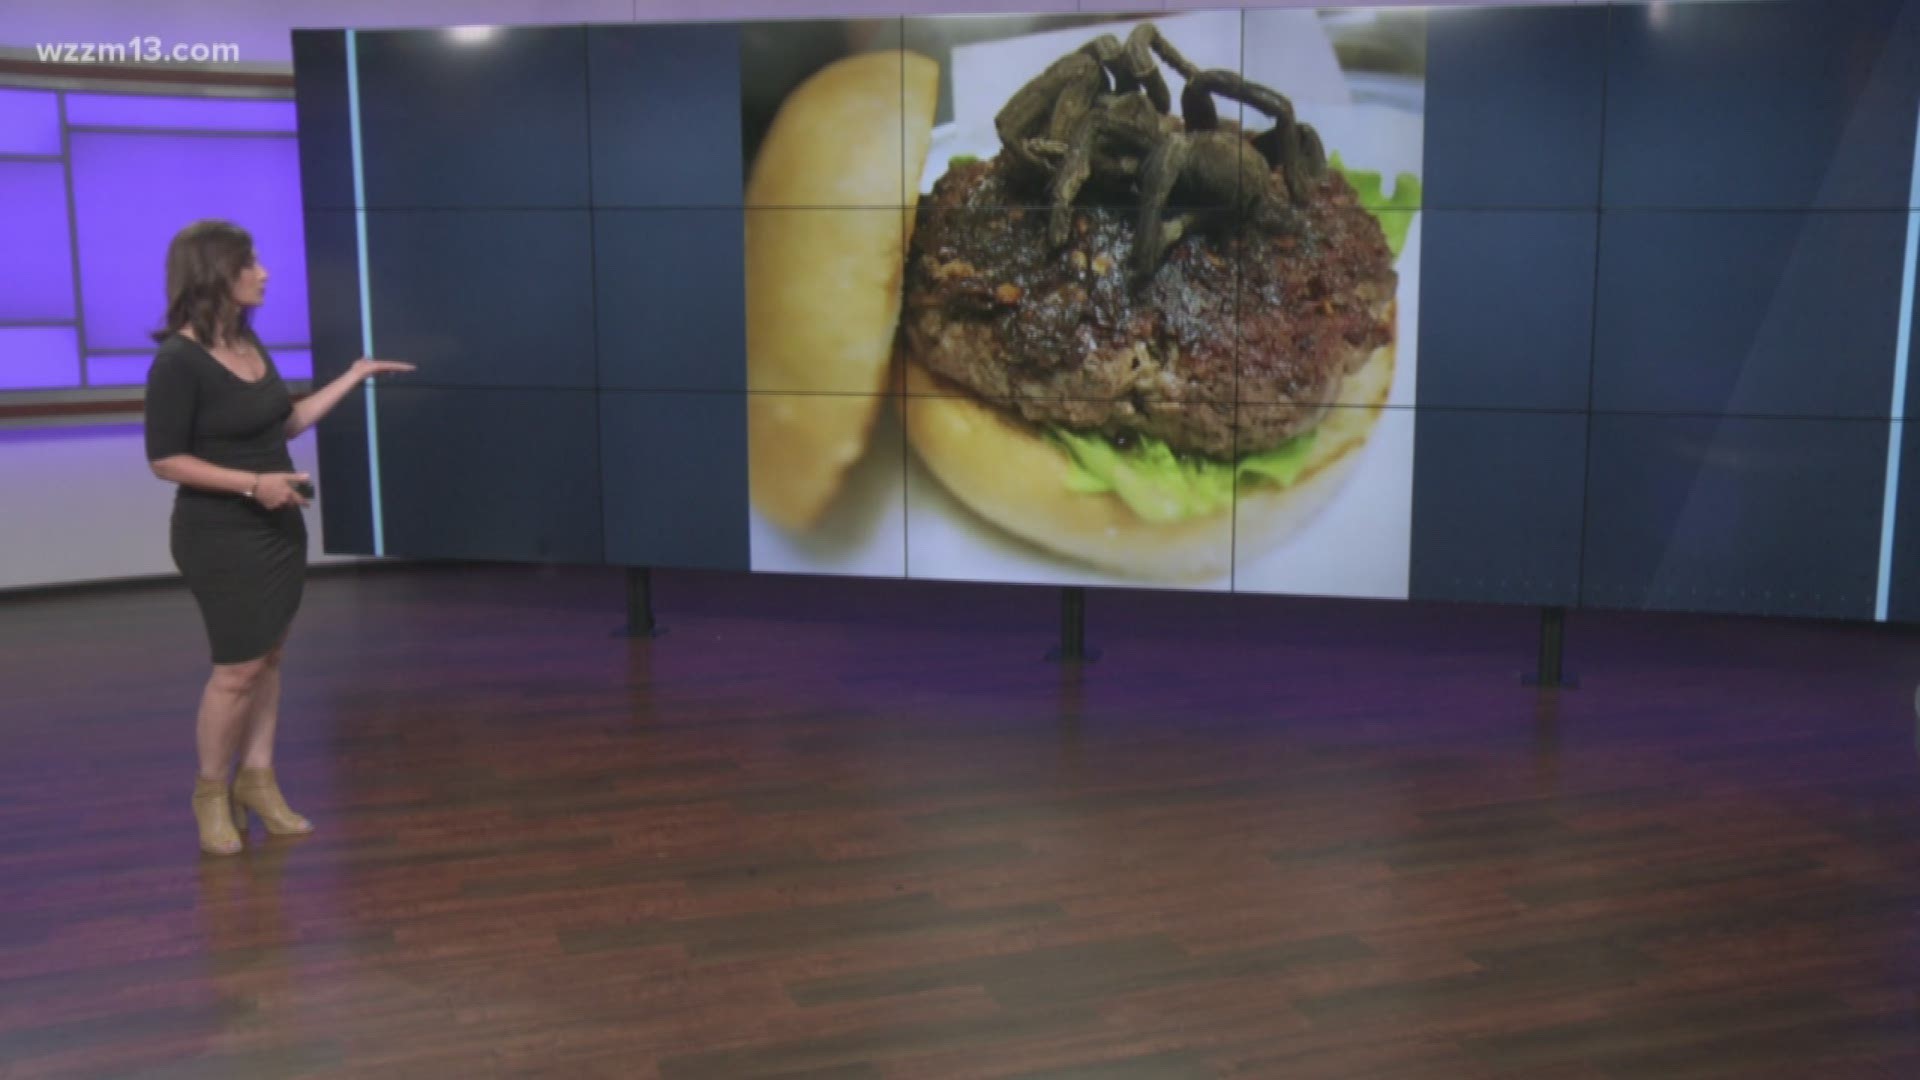 Verify: Are bugs safe to eat?